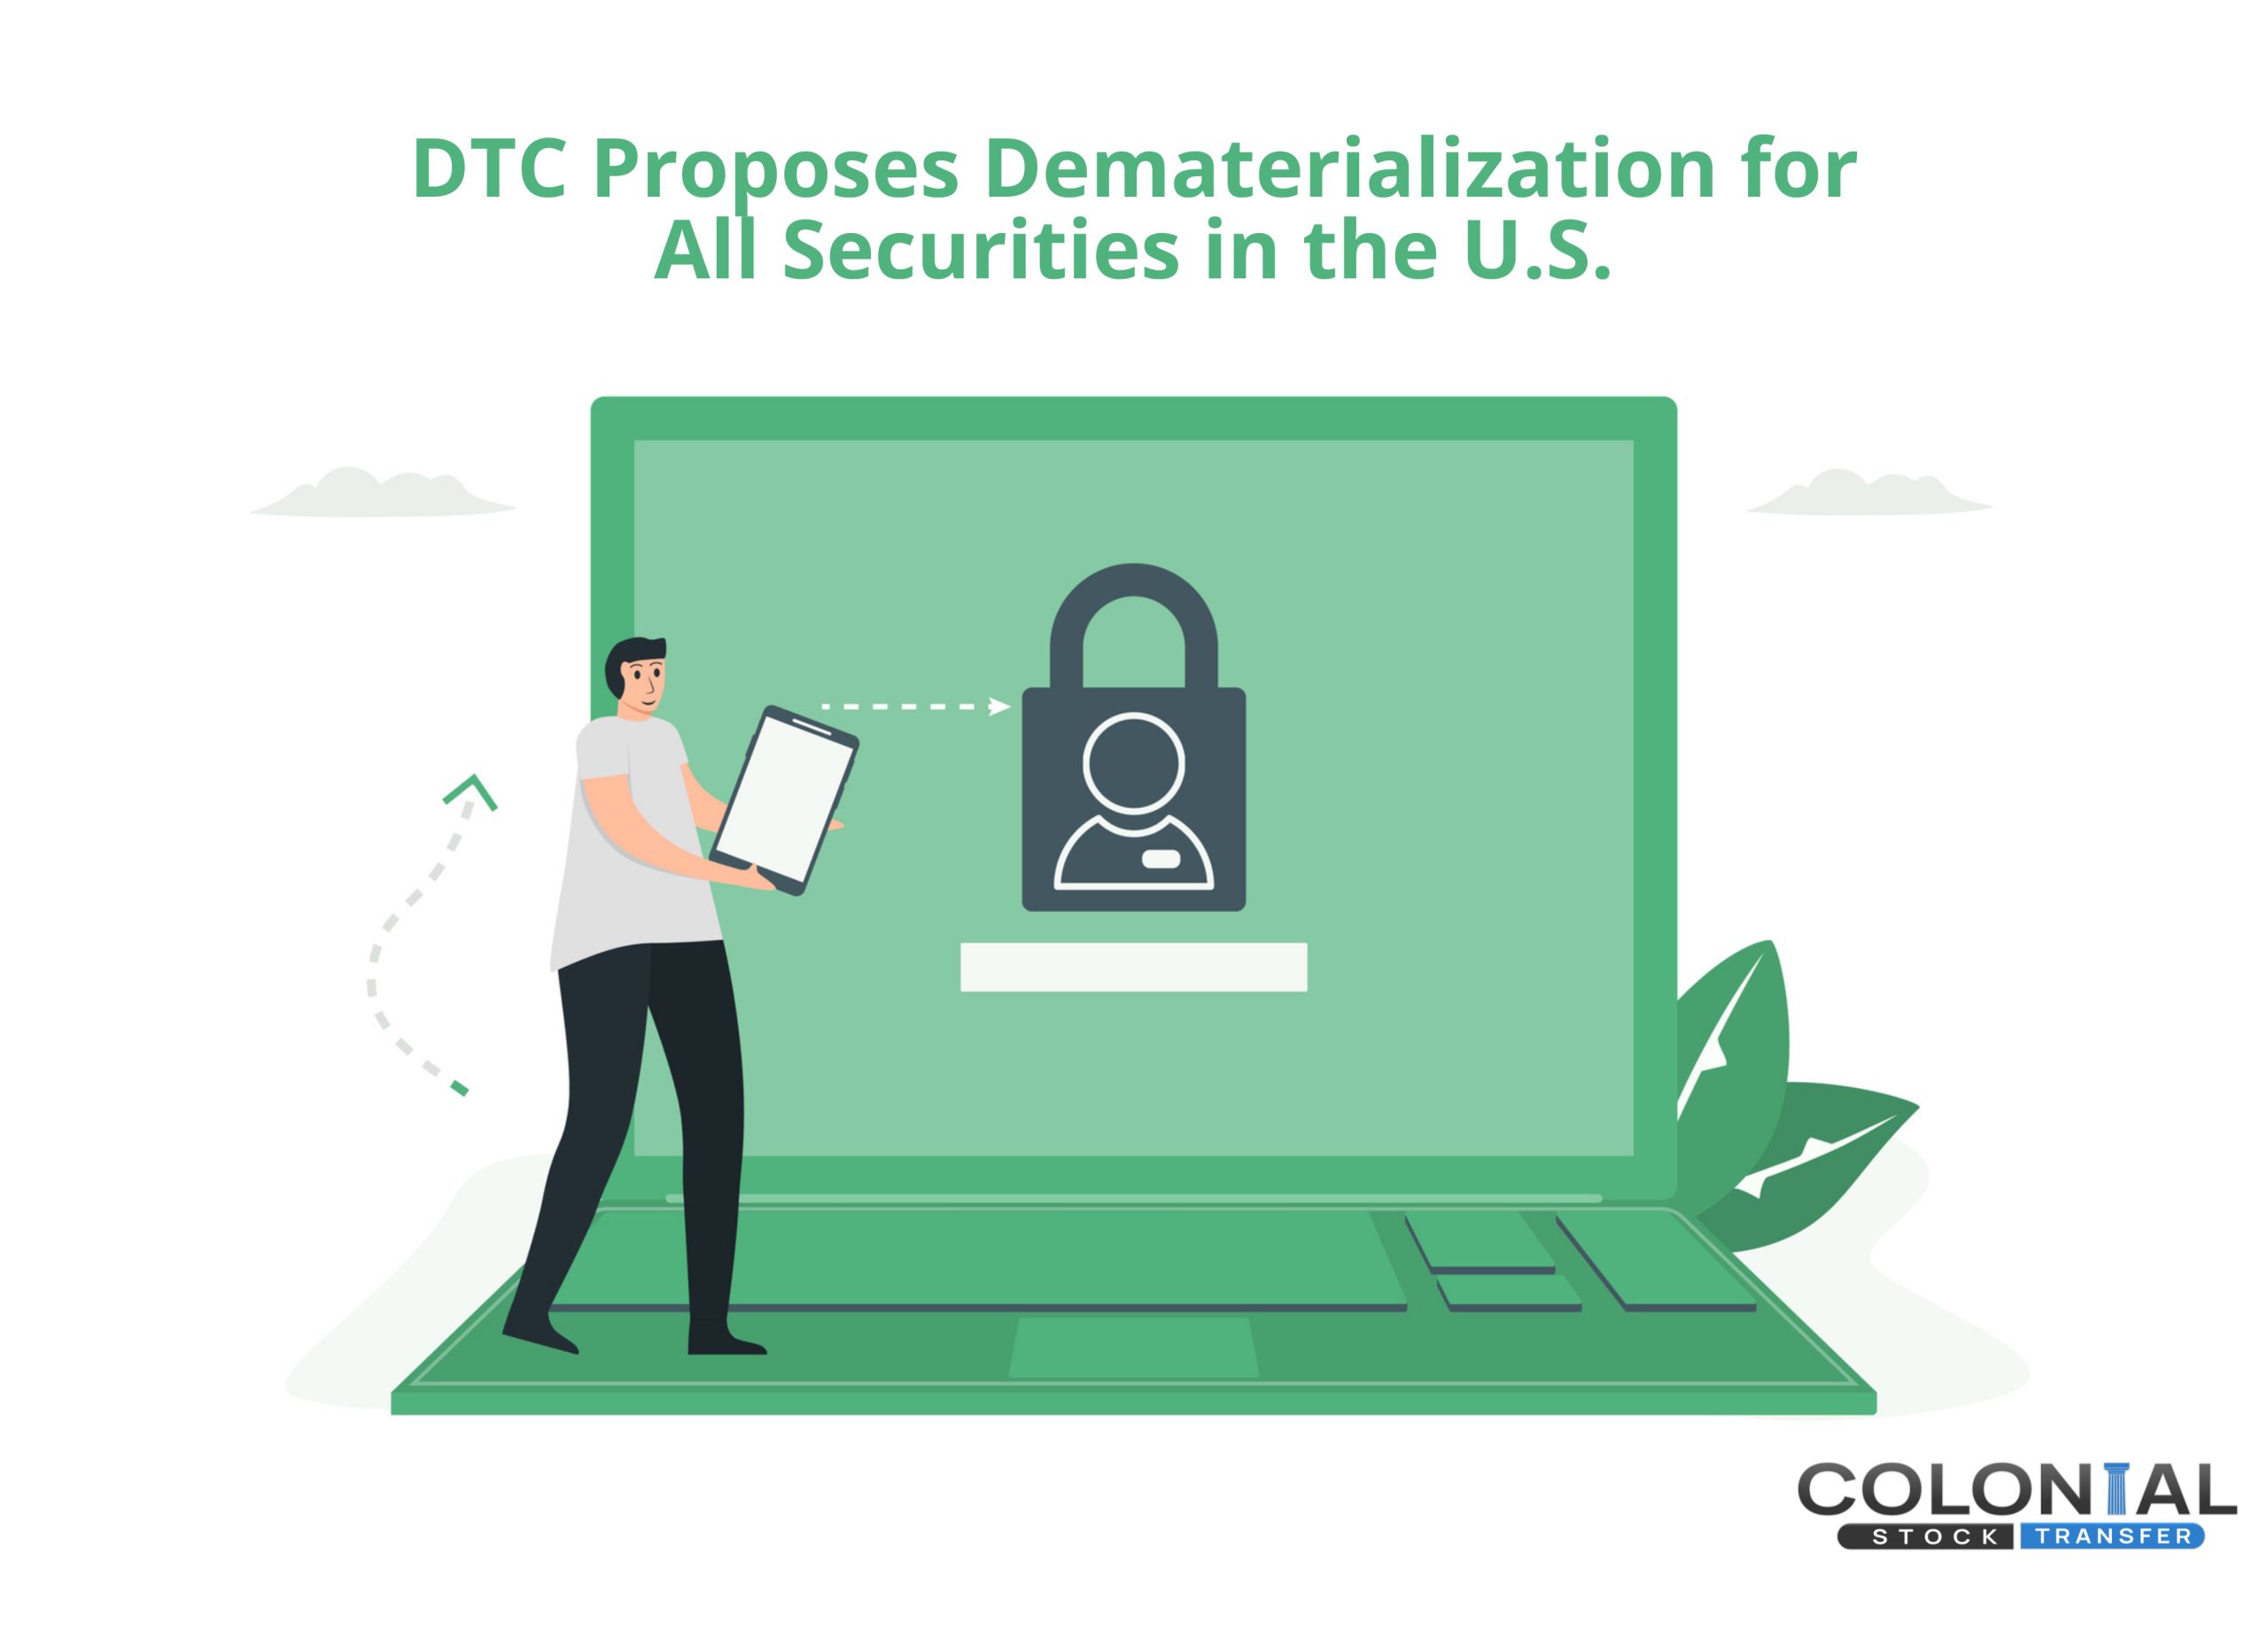 DTC Proposes Dematerialization for All Securities in the U.S.